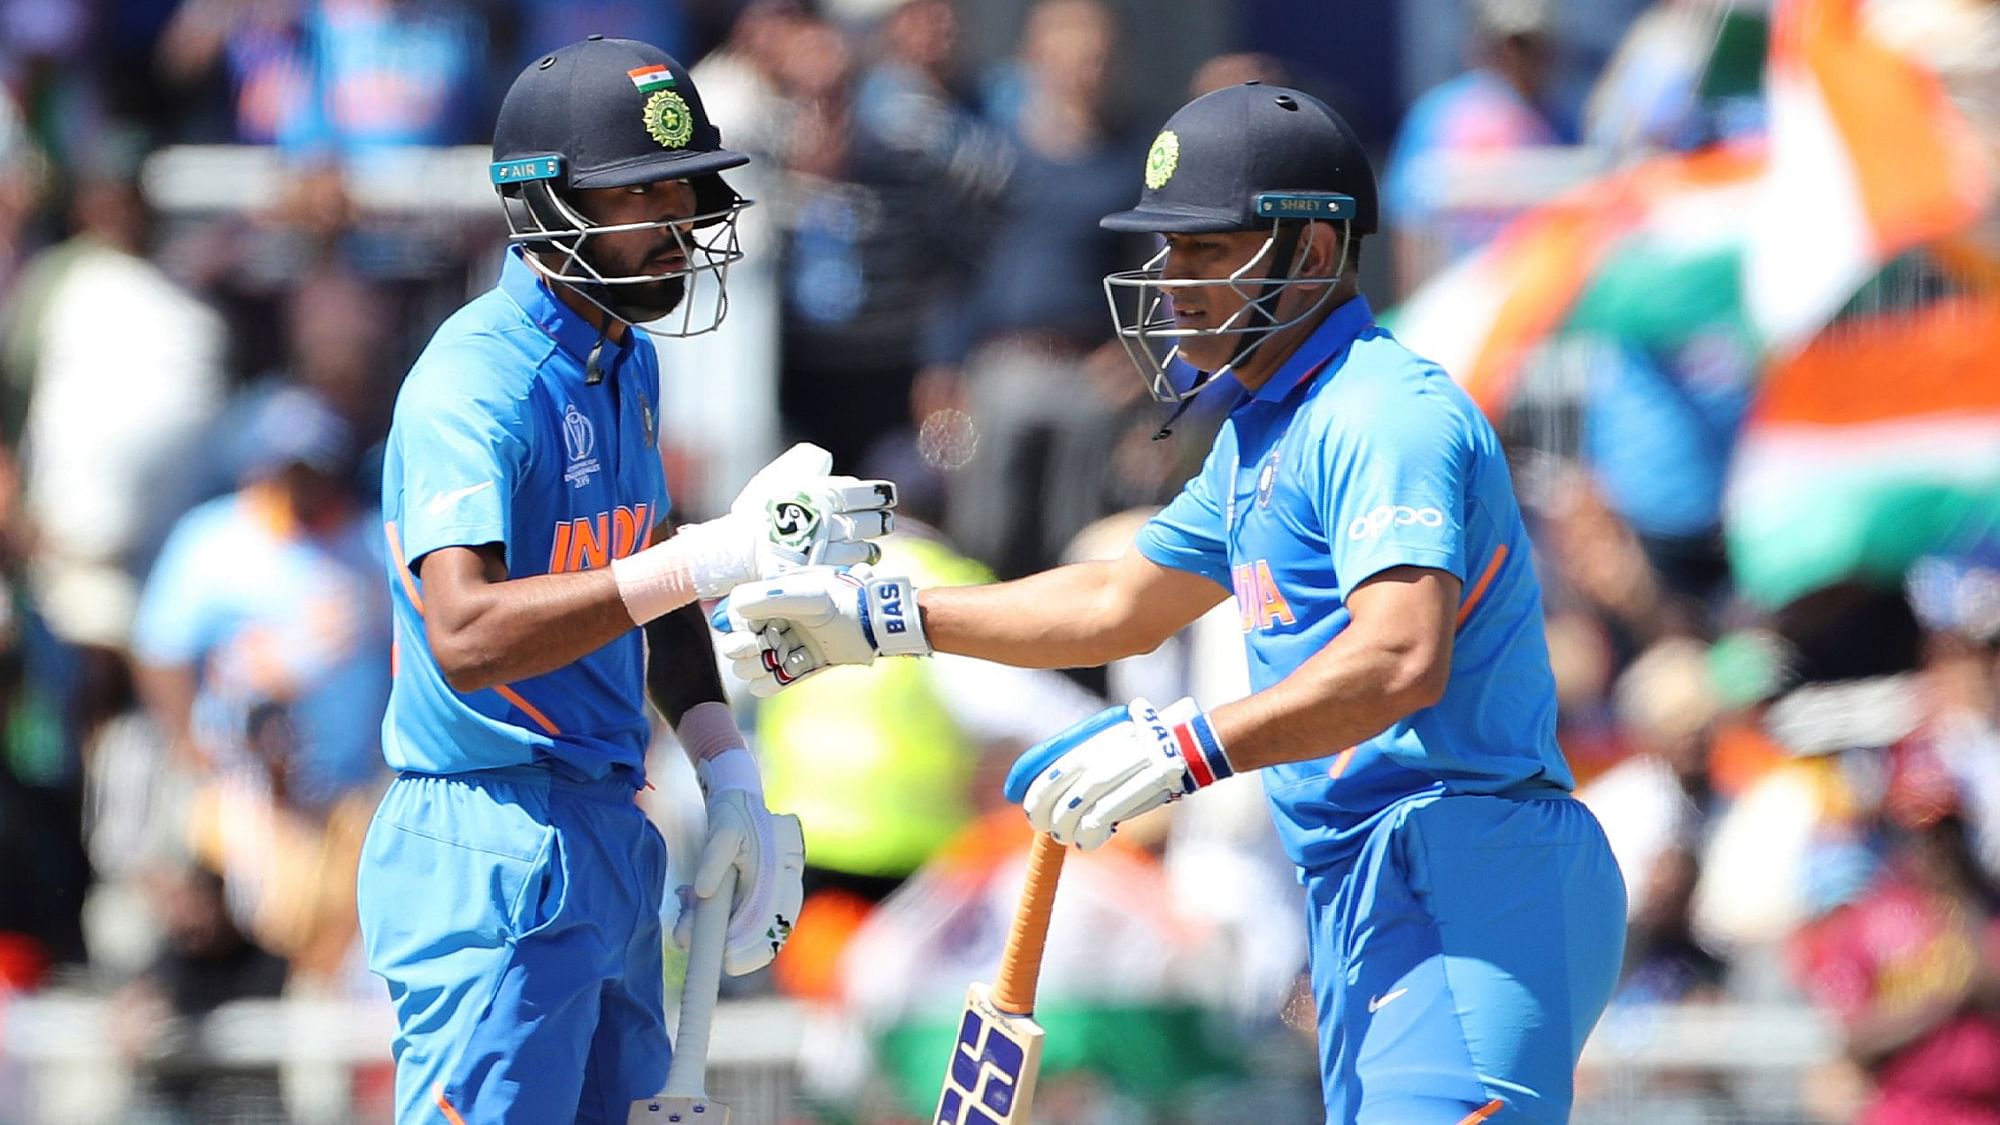 Dhoni scored 16 runs off Oshane Thomas with two sixes and a boundary as he put up a 70-run stand with Hardik Pandya.